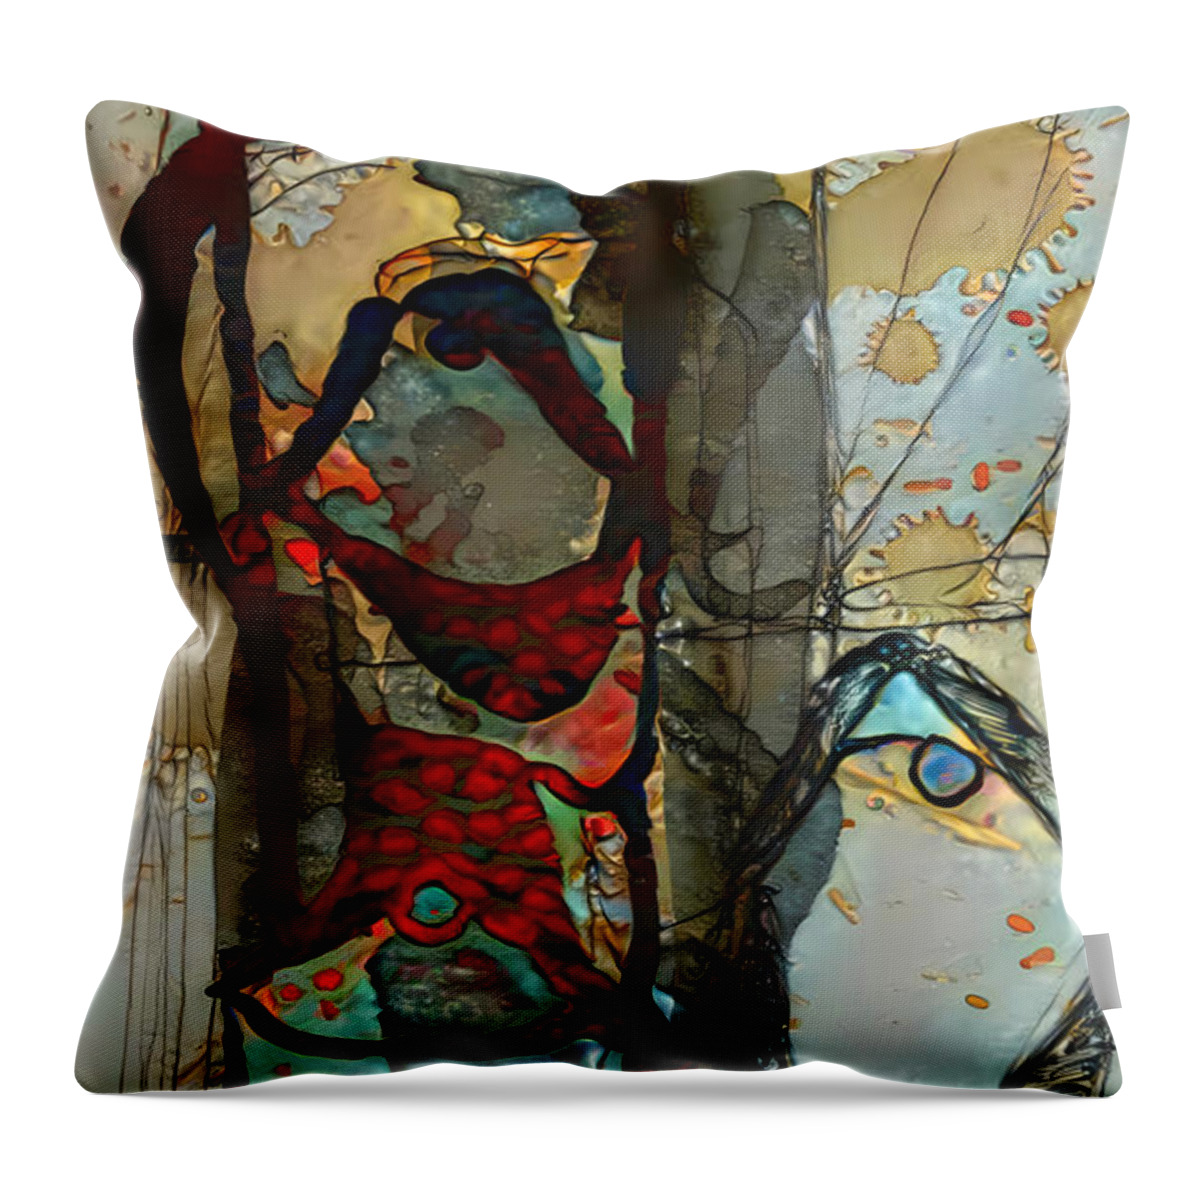 Contemporary Art Throw Pillow featuring the digital art 58 by Jeremiah Ray